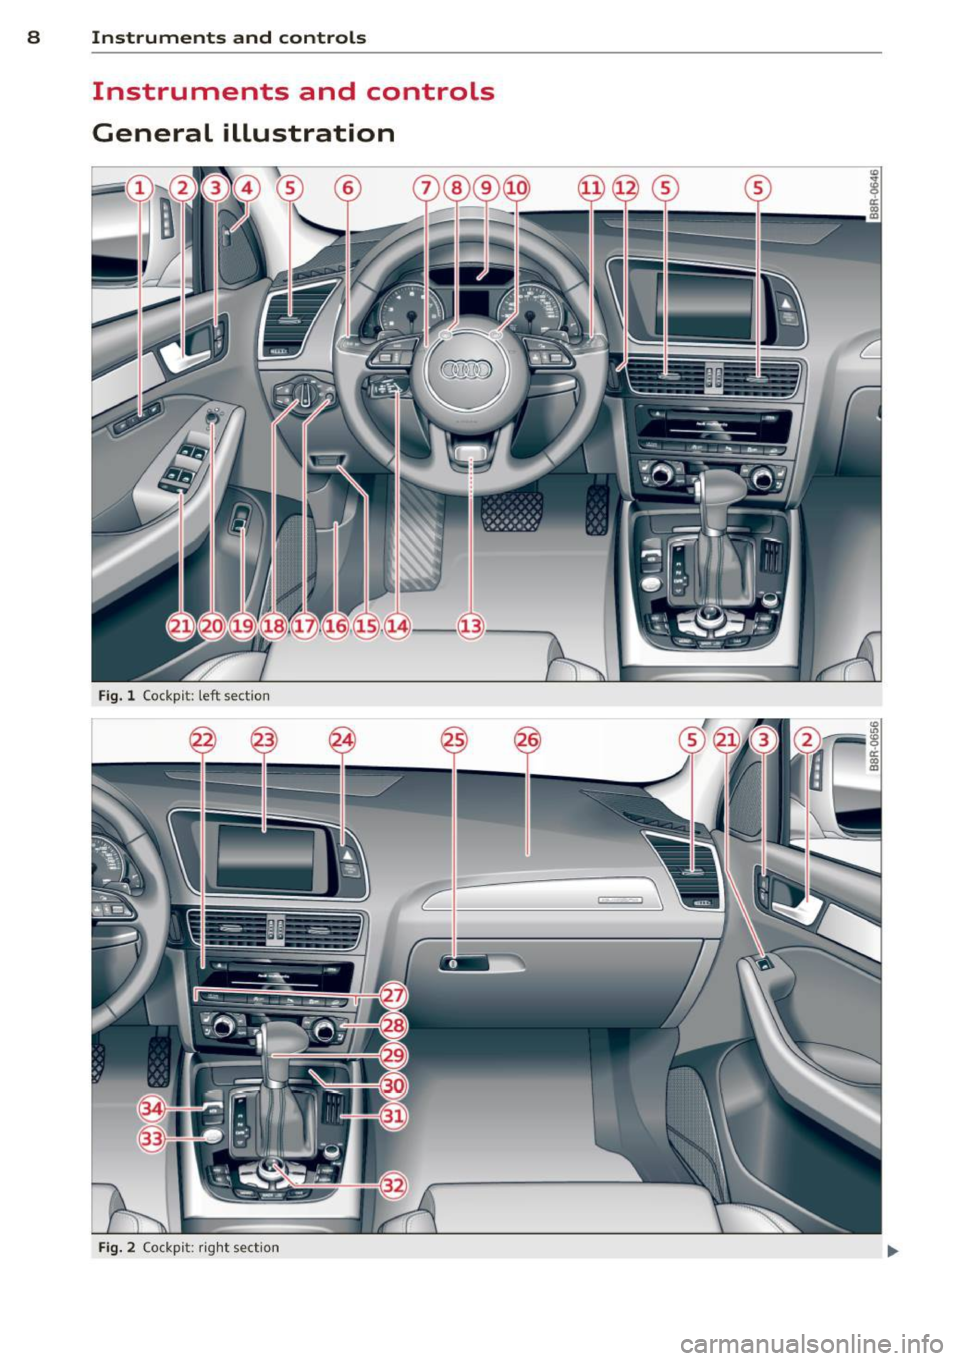 AUDI Q5 2014  Owners Manual 8  Instruments and controls 
Instruments  and  controls 
General  illustration 
Fig. l Cockp it:  left  sect io n 
Fig. 2 Co ck pi t: ri ght  sect io n  